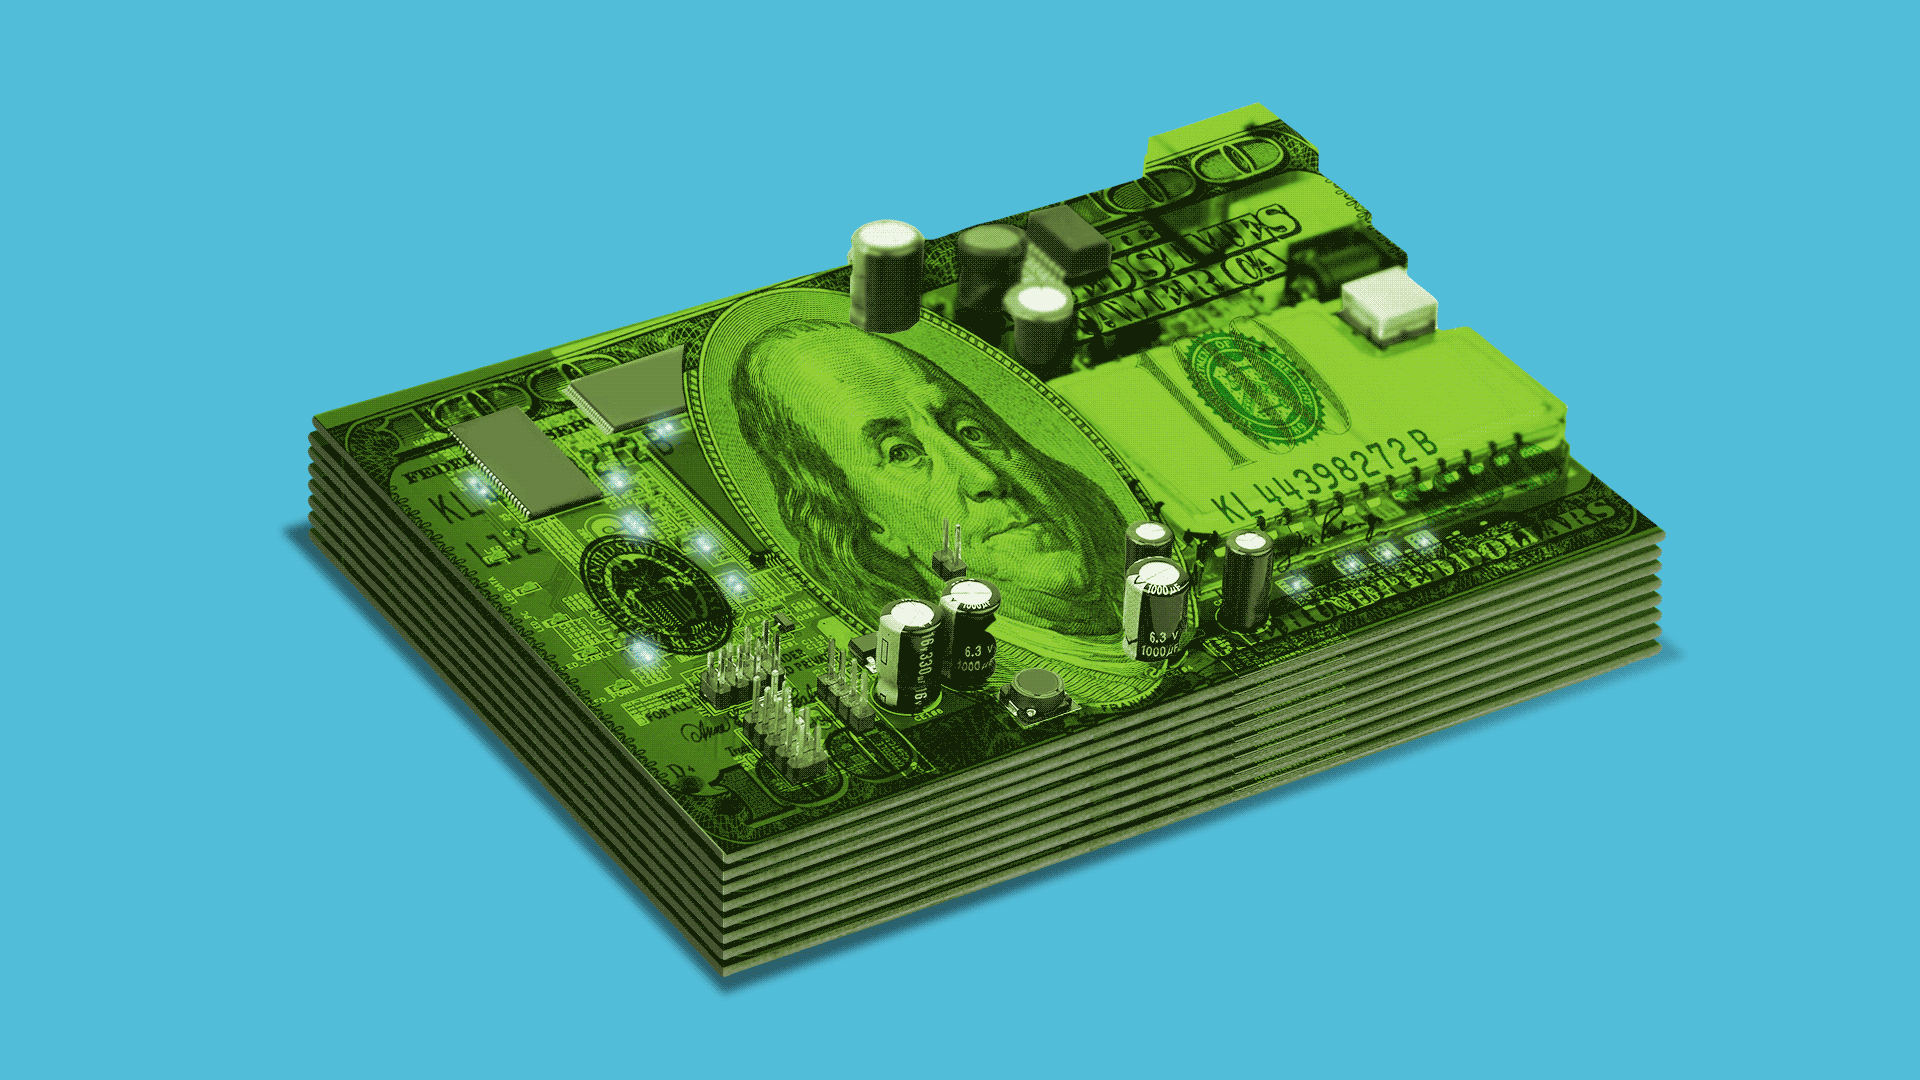 Illustration of a stack of circuit boards shaped like hundred dollar bills